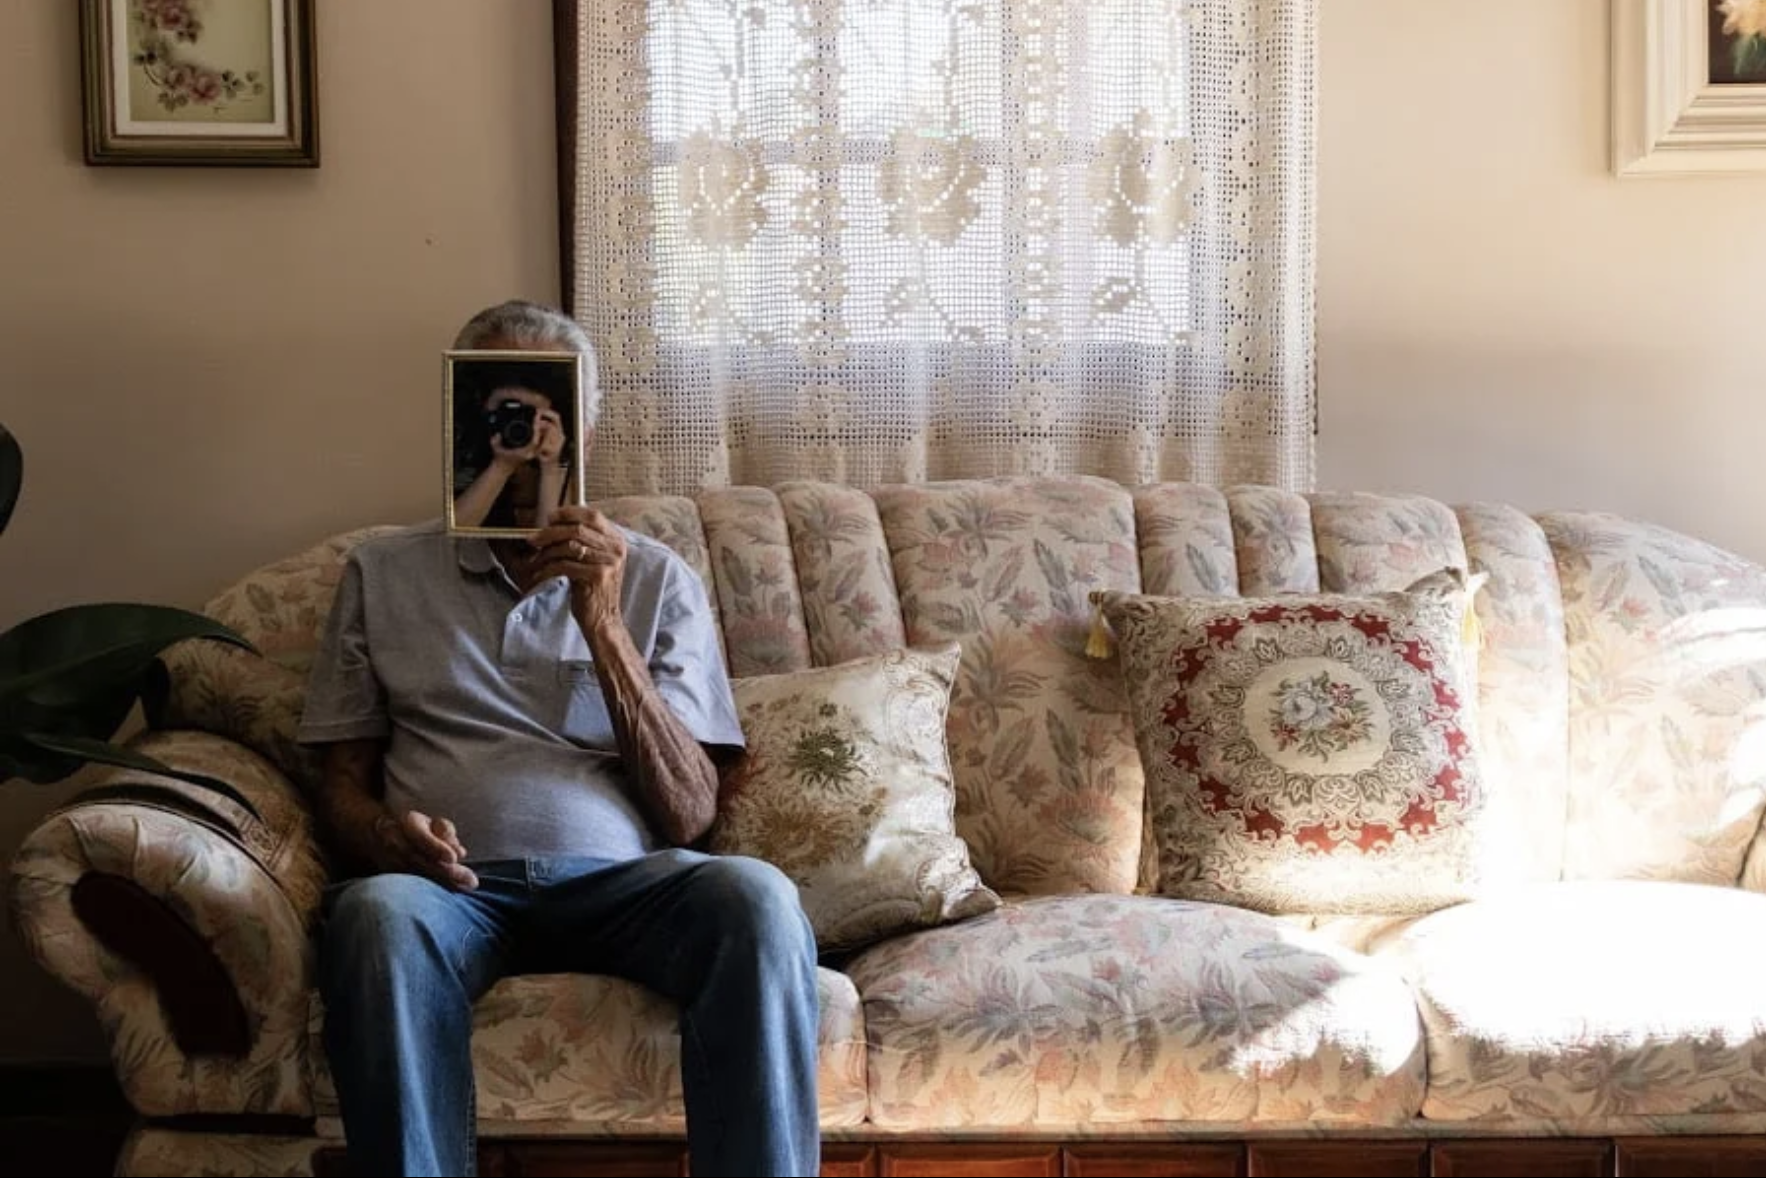 Edivaldo, my grandfather on my mother’s side, sits in his living room and holds a mirror where my image is reflected.